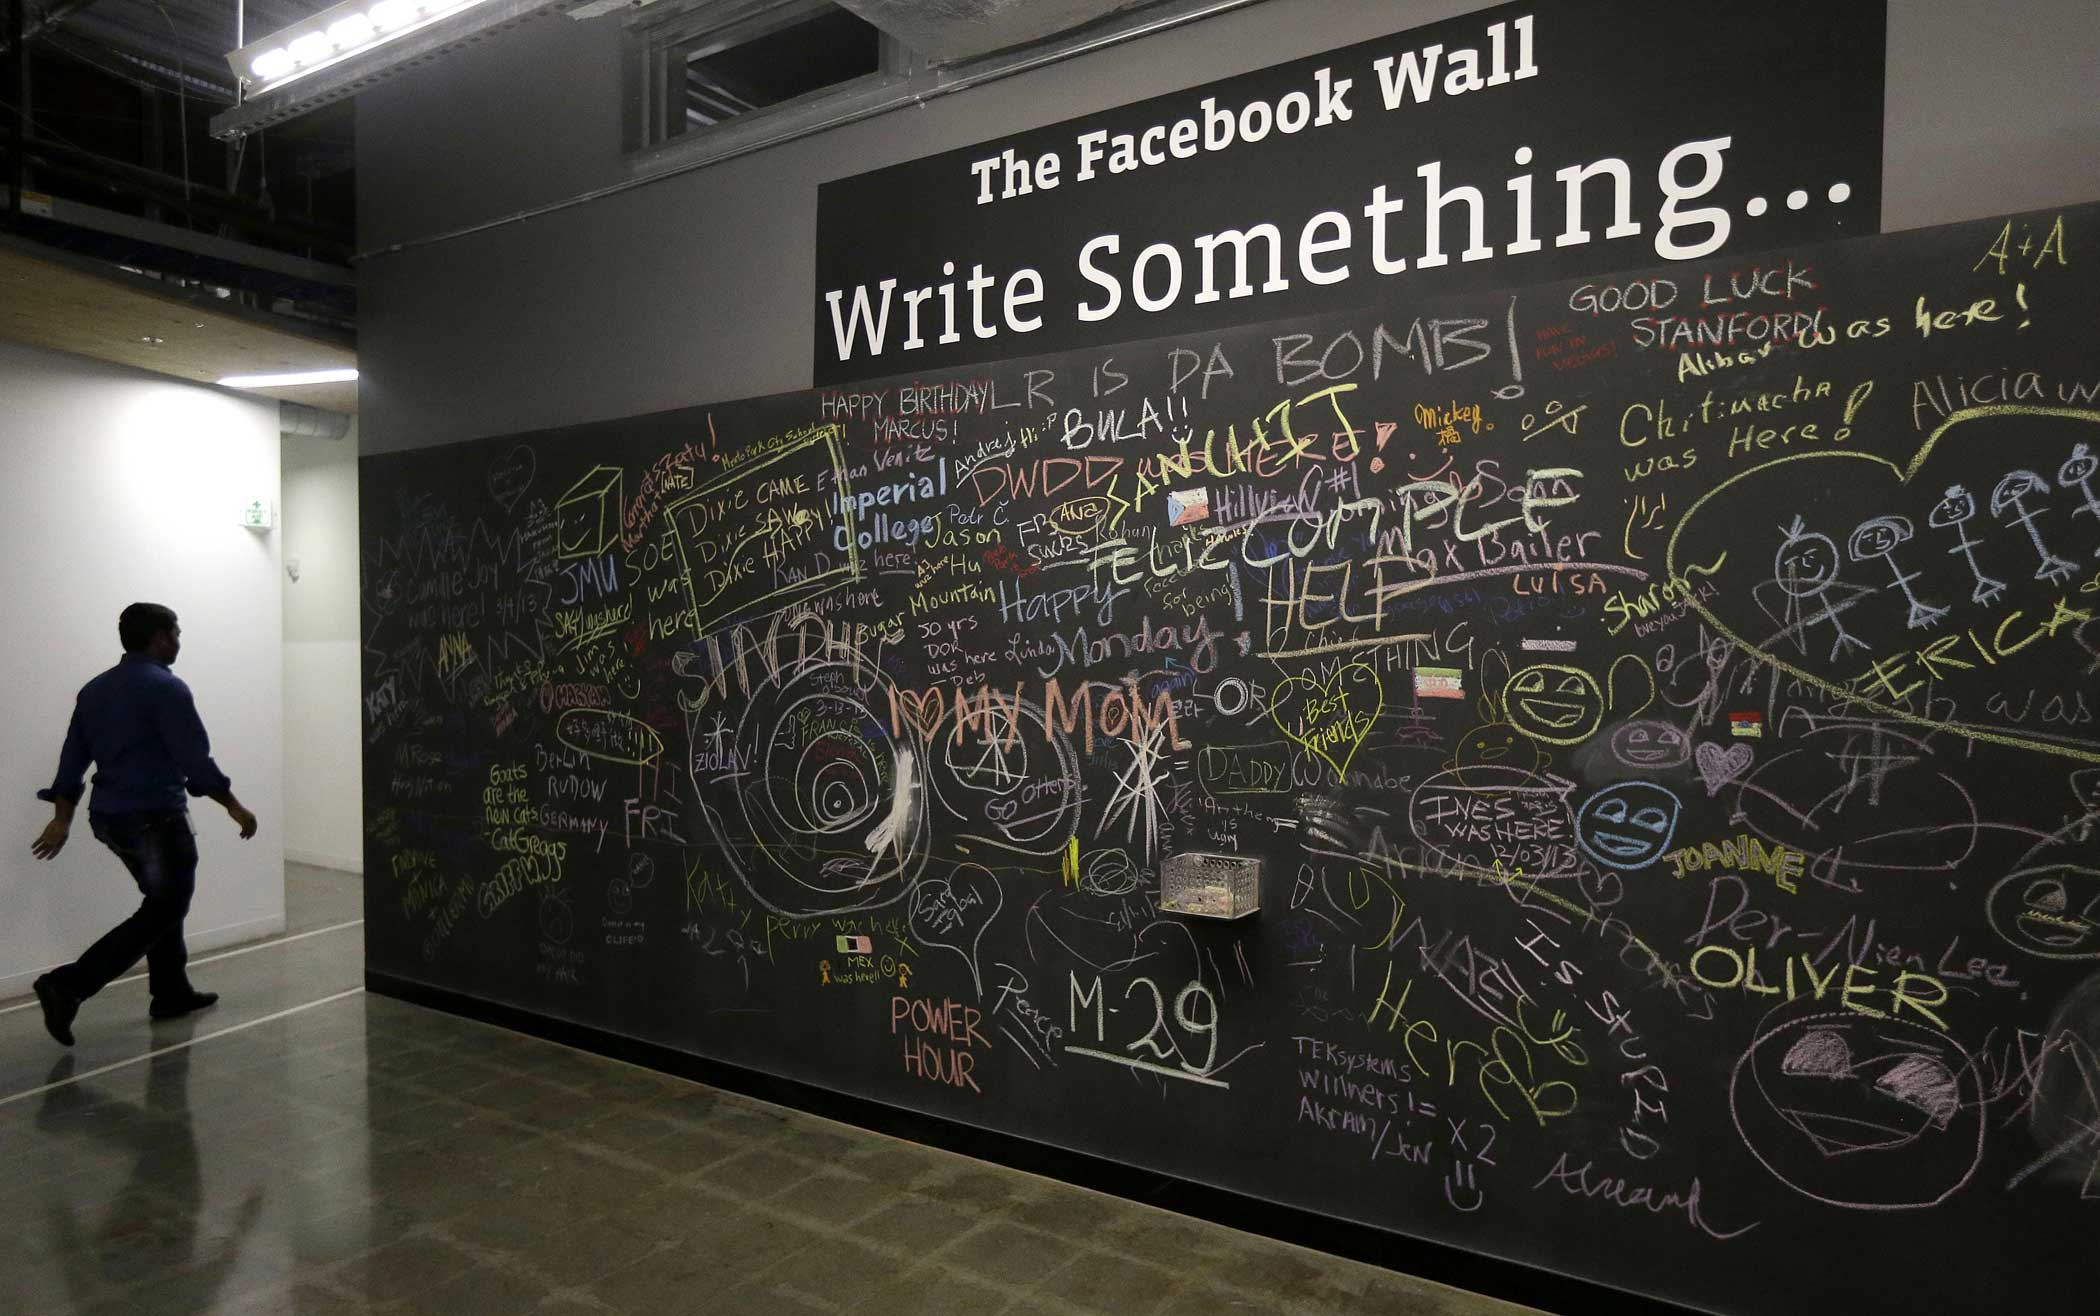 Main Headquarters: A Facebook employee walks past The Facebook Wall at MPK 10.